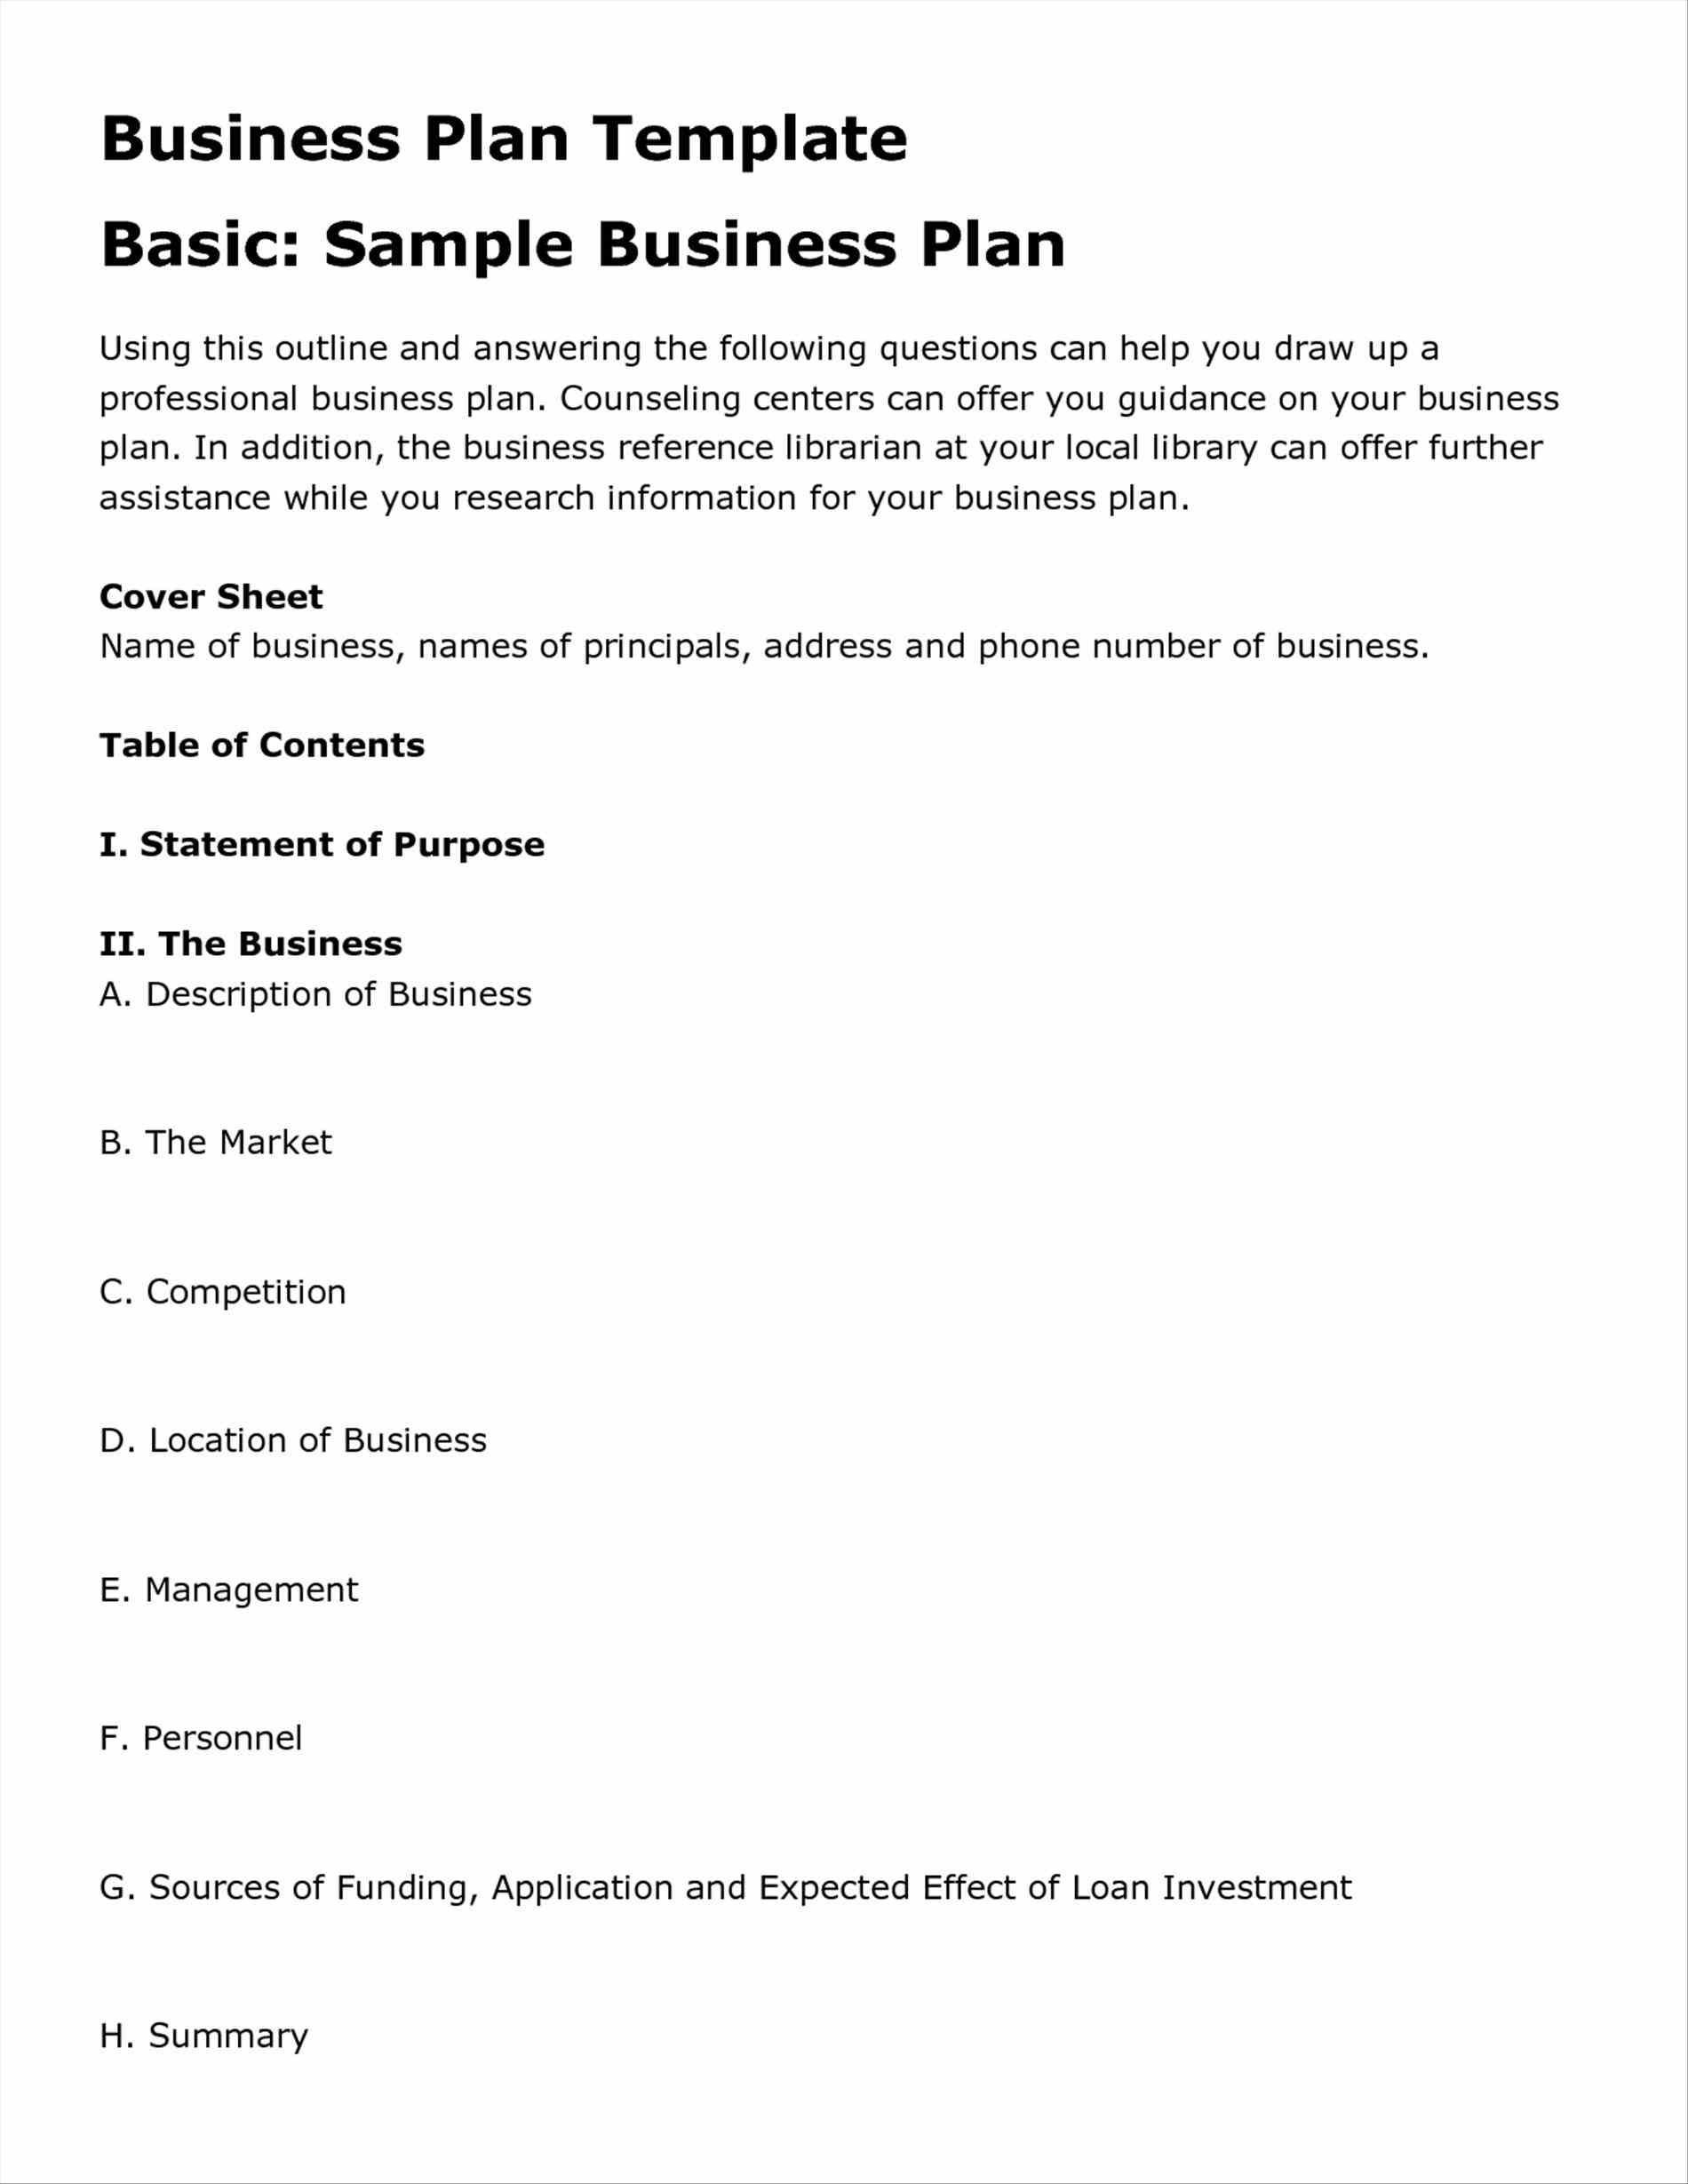 Business Plan Template Restaurant Templates In Word Excel Pdf Free regarding Business Plan For Cafe Free Template